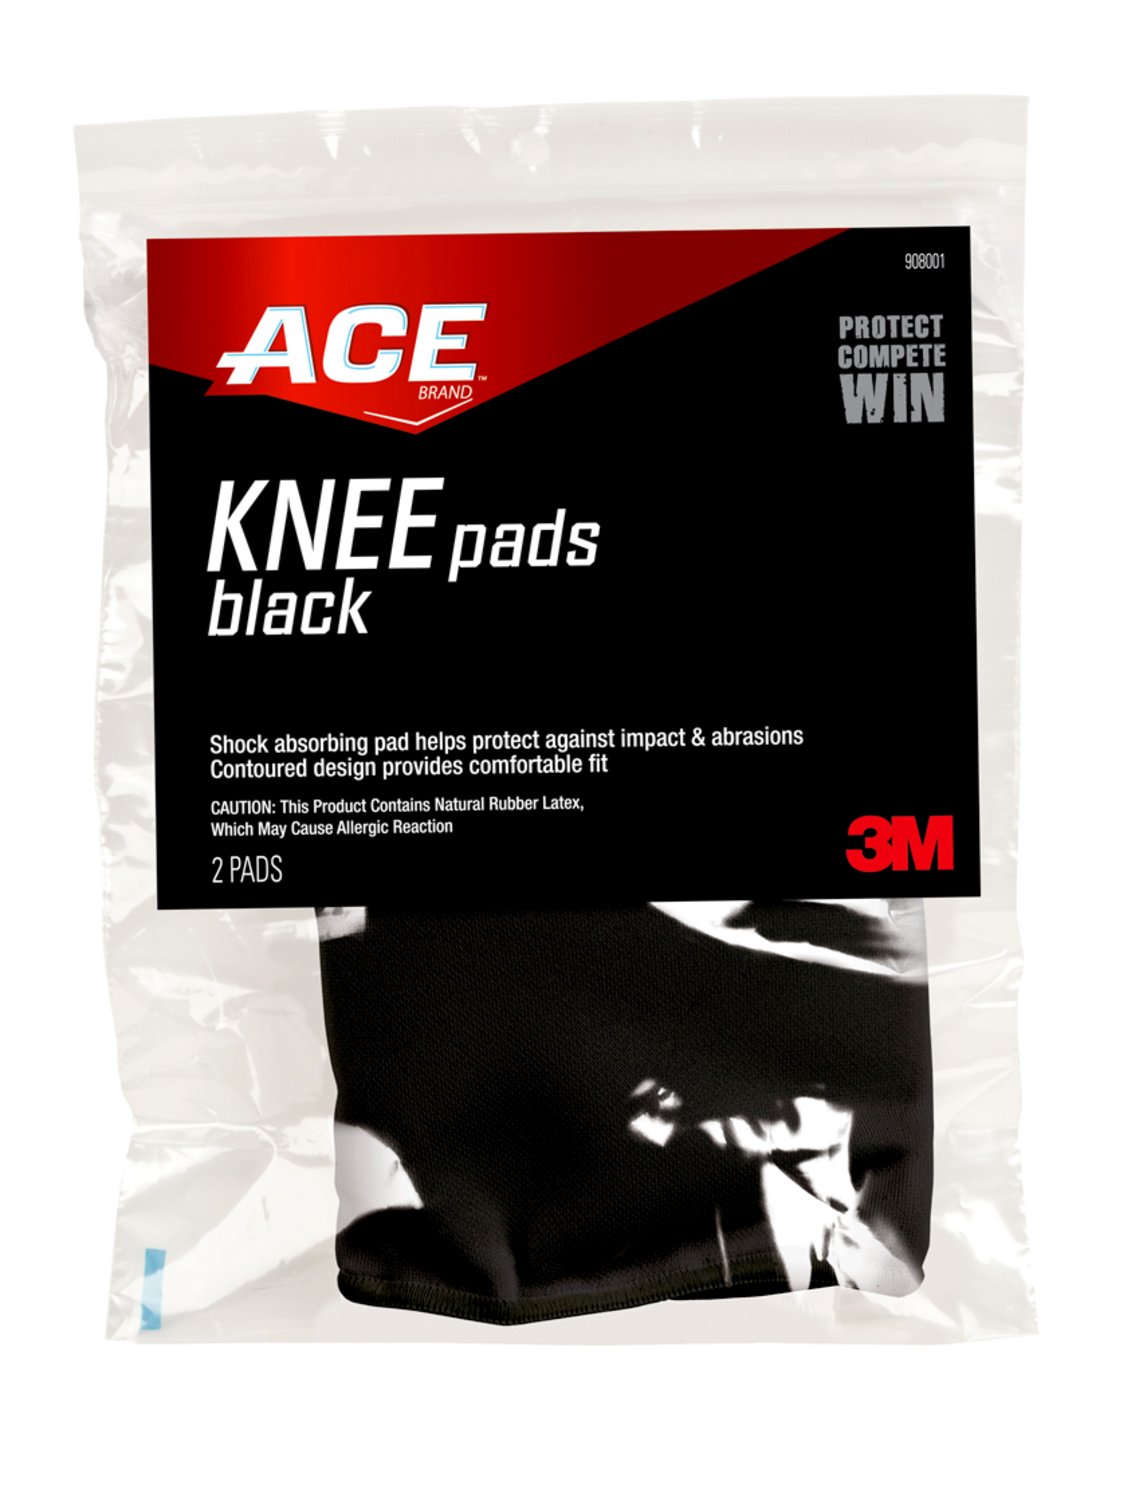 7100172910 - ACE Knee Pads 908001, One Size